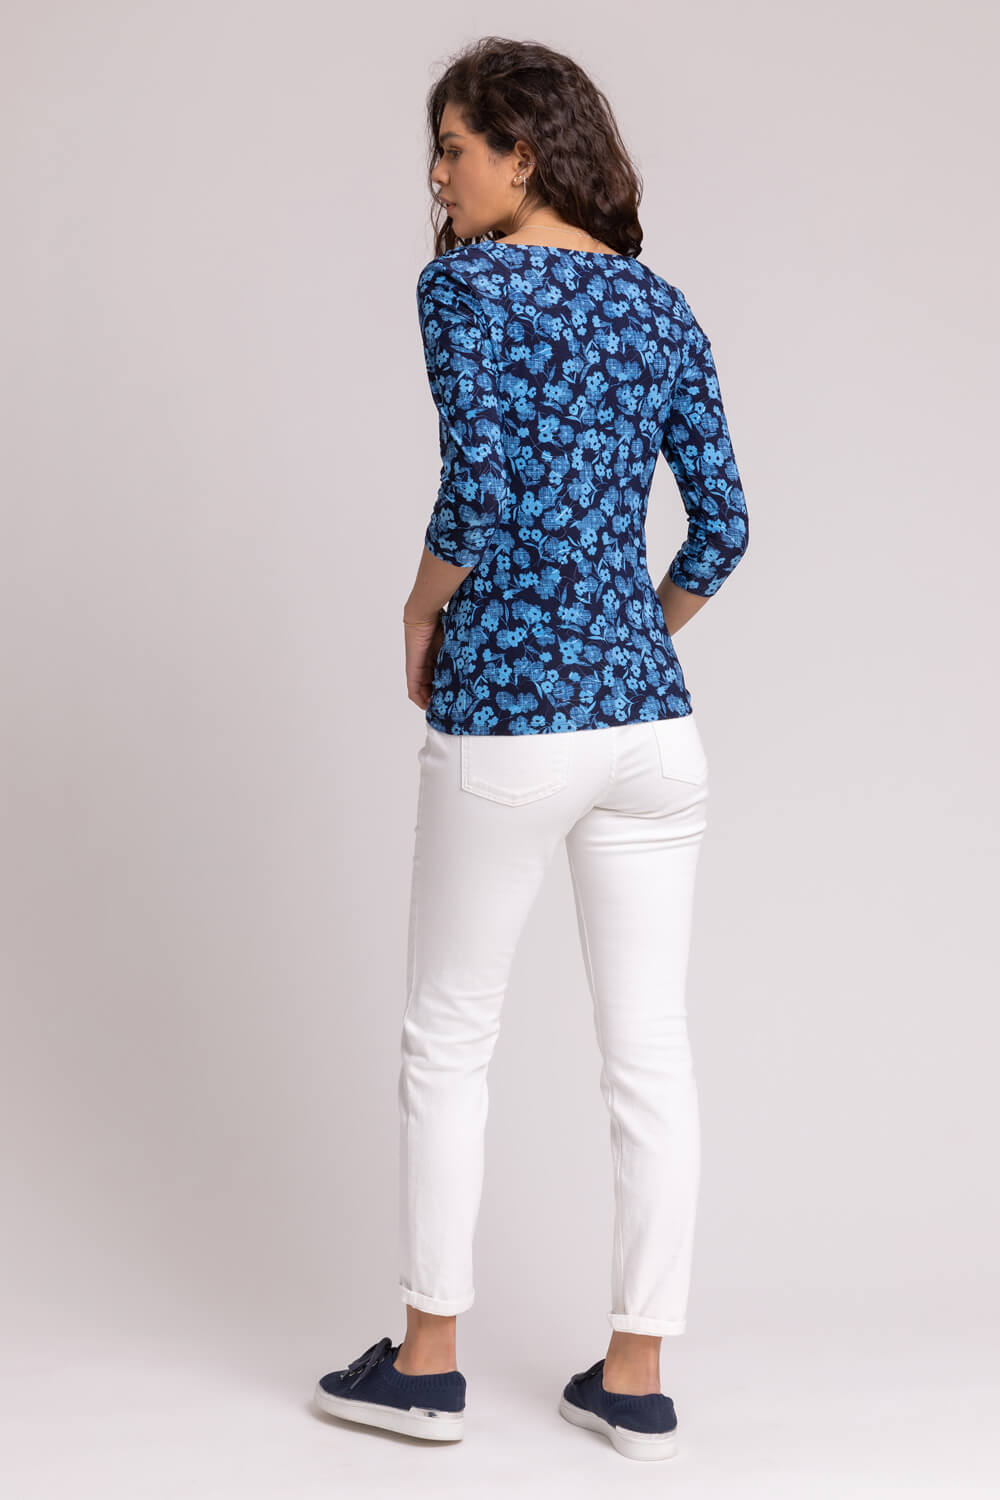 Blue Floral Print Cowl Neck Top, Image 2 of 4